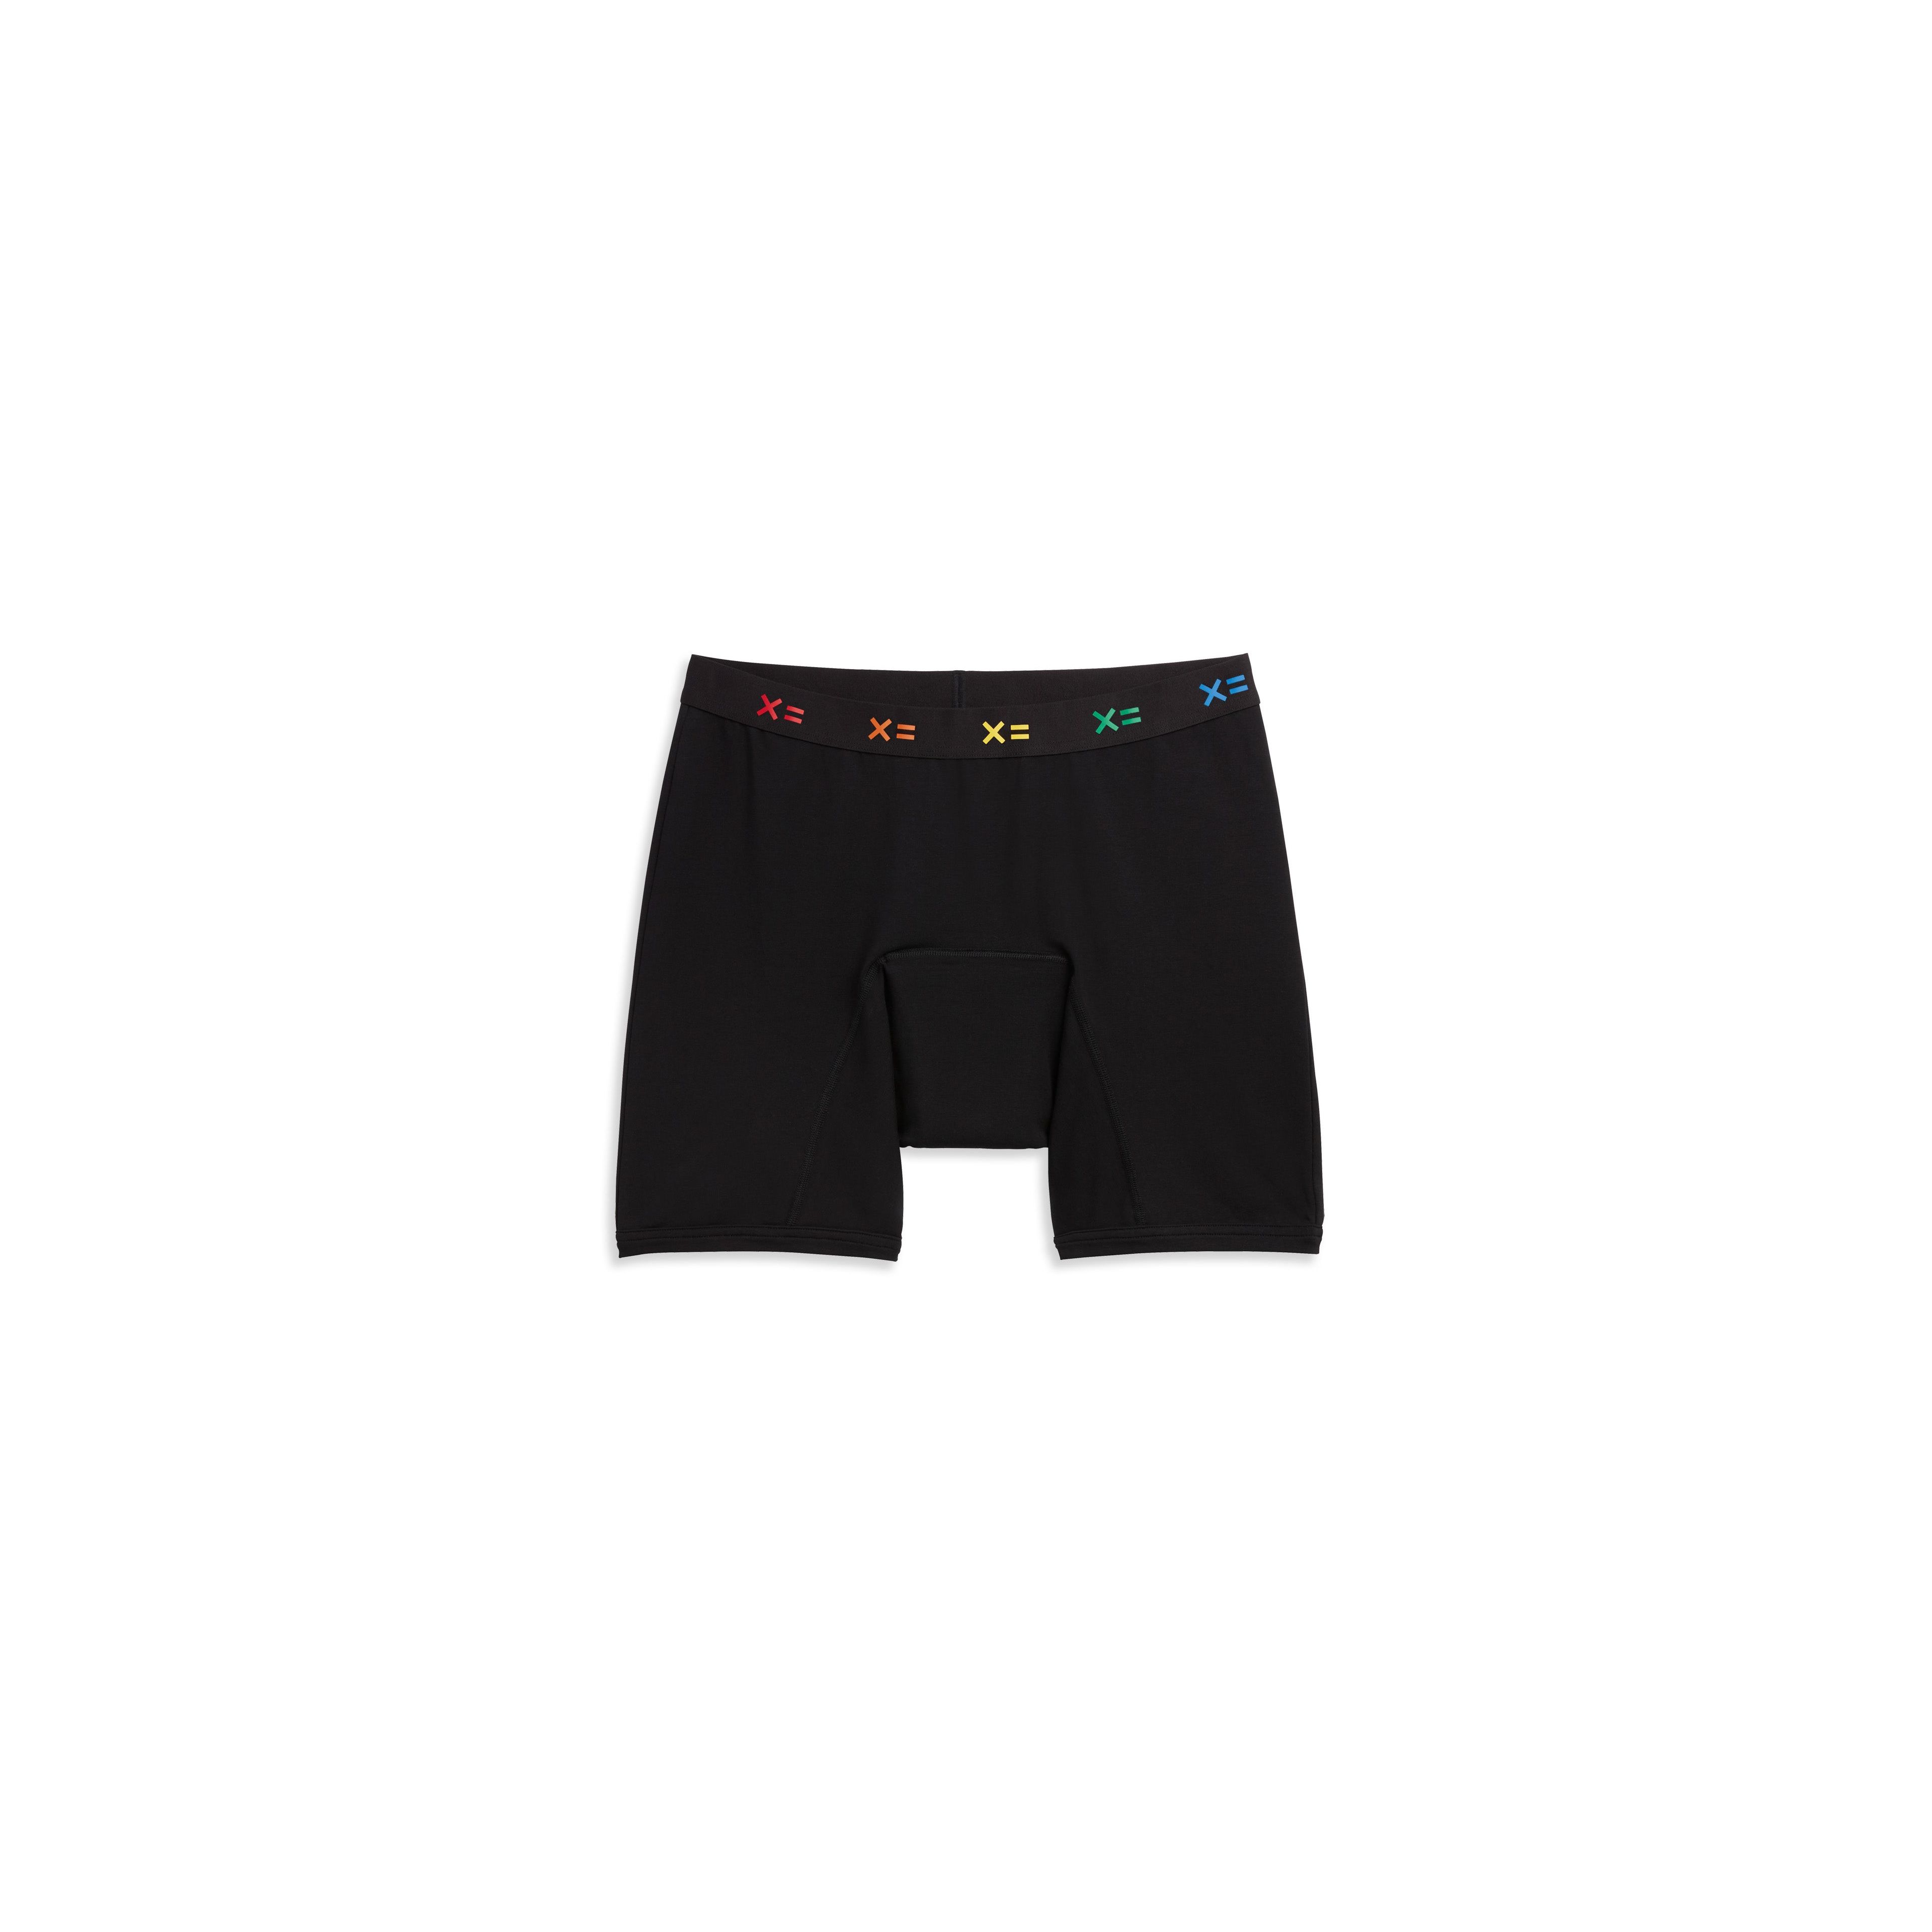 https://cdn.prod.marmalade.co/products/fit-in/3840x3840/filters:quality(80):fill(ffffff)/www.tomboyx.com%2Fproducts%2Ffirst-line-period-9-boxer-briefs-black-x-rainbow%2F1700005887%2FFirst_Line_x__Rainbow_9in_1.jpg